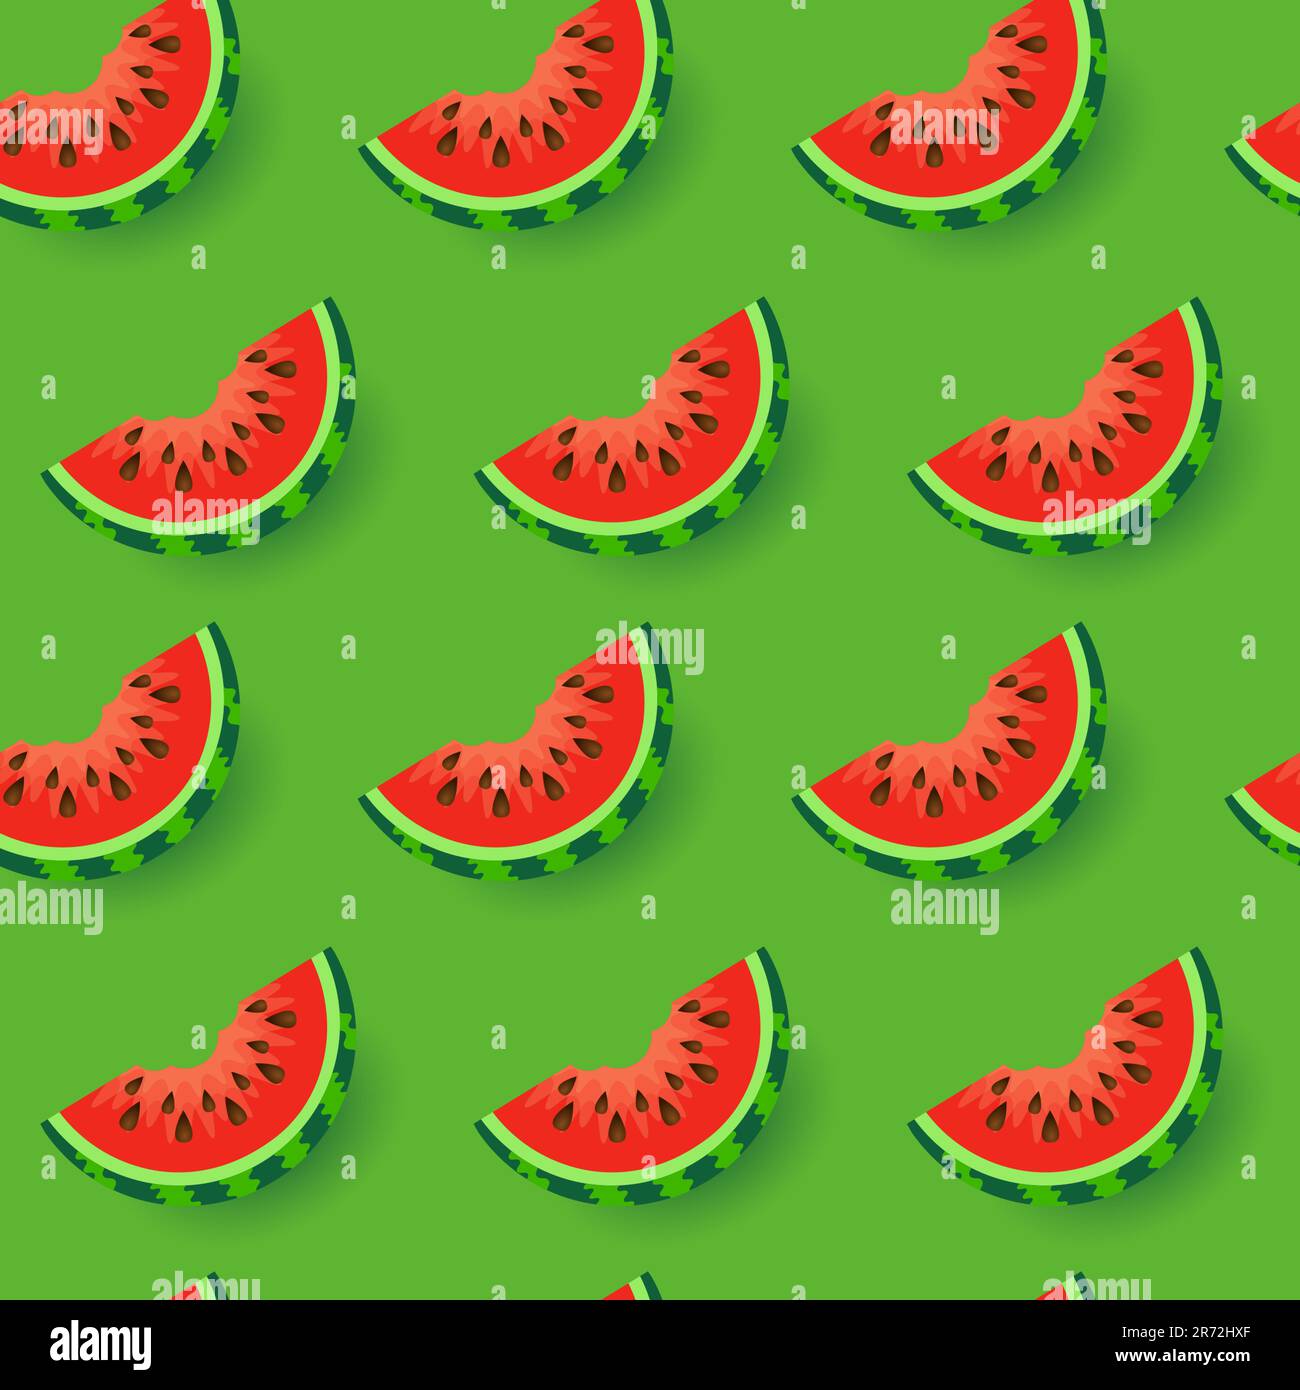 Green 3D seamless pattern background with watermelon slices illustration for food, nature, summer vacation design. Stock Vector